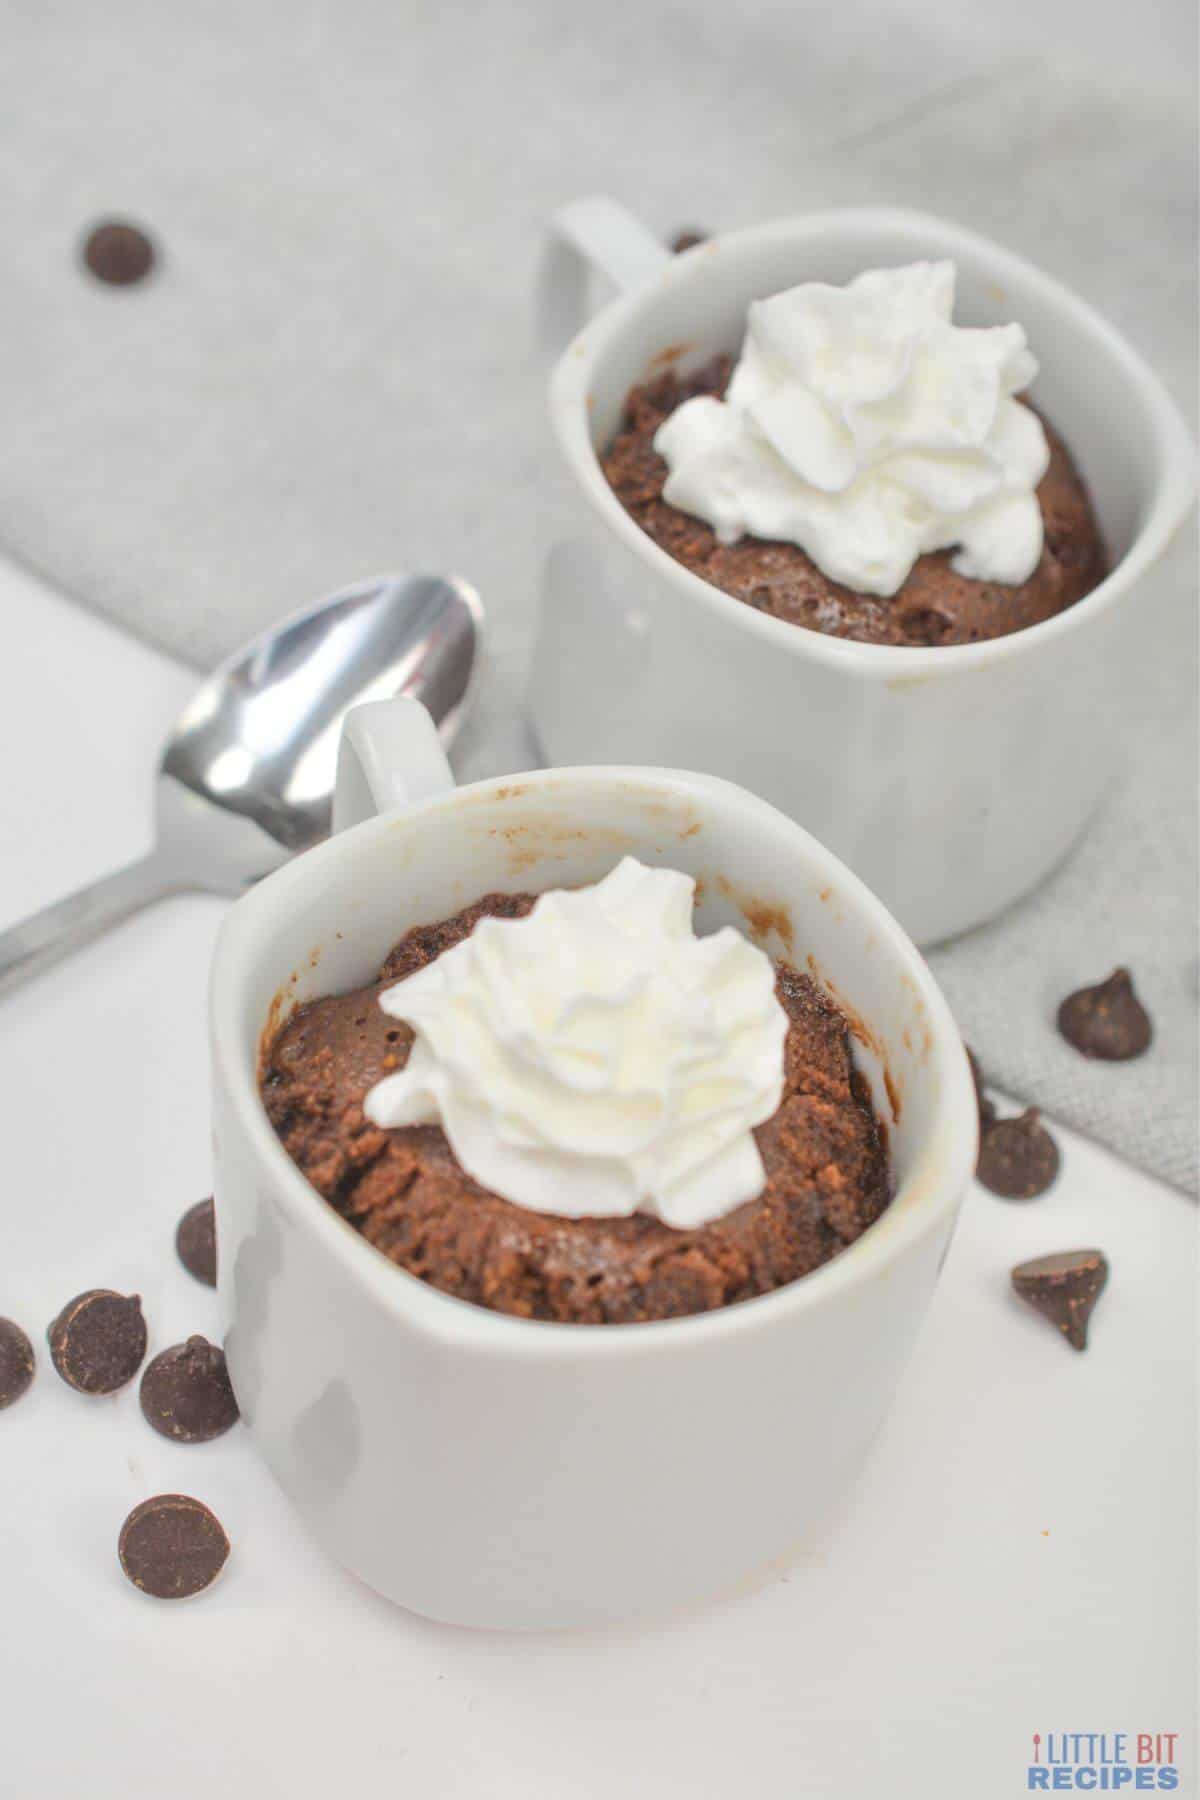 cakes in mugs topped with whipped cream.